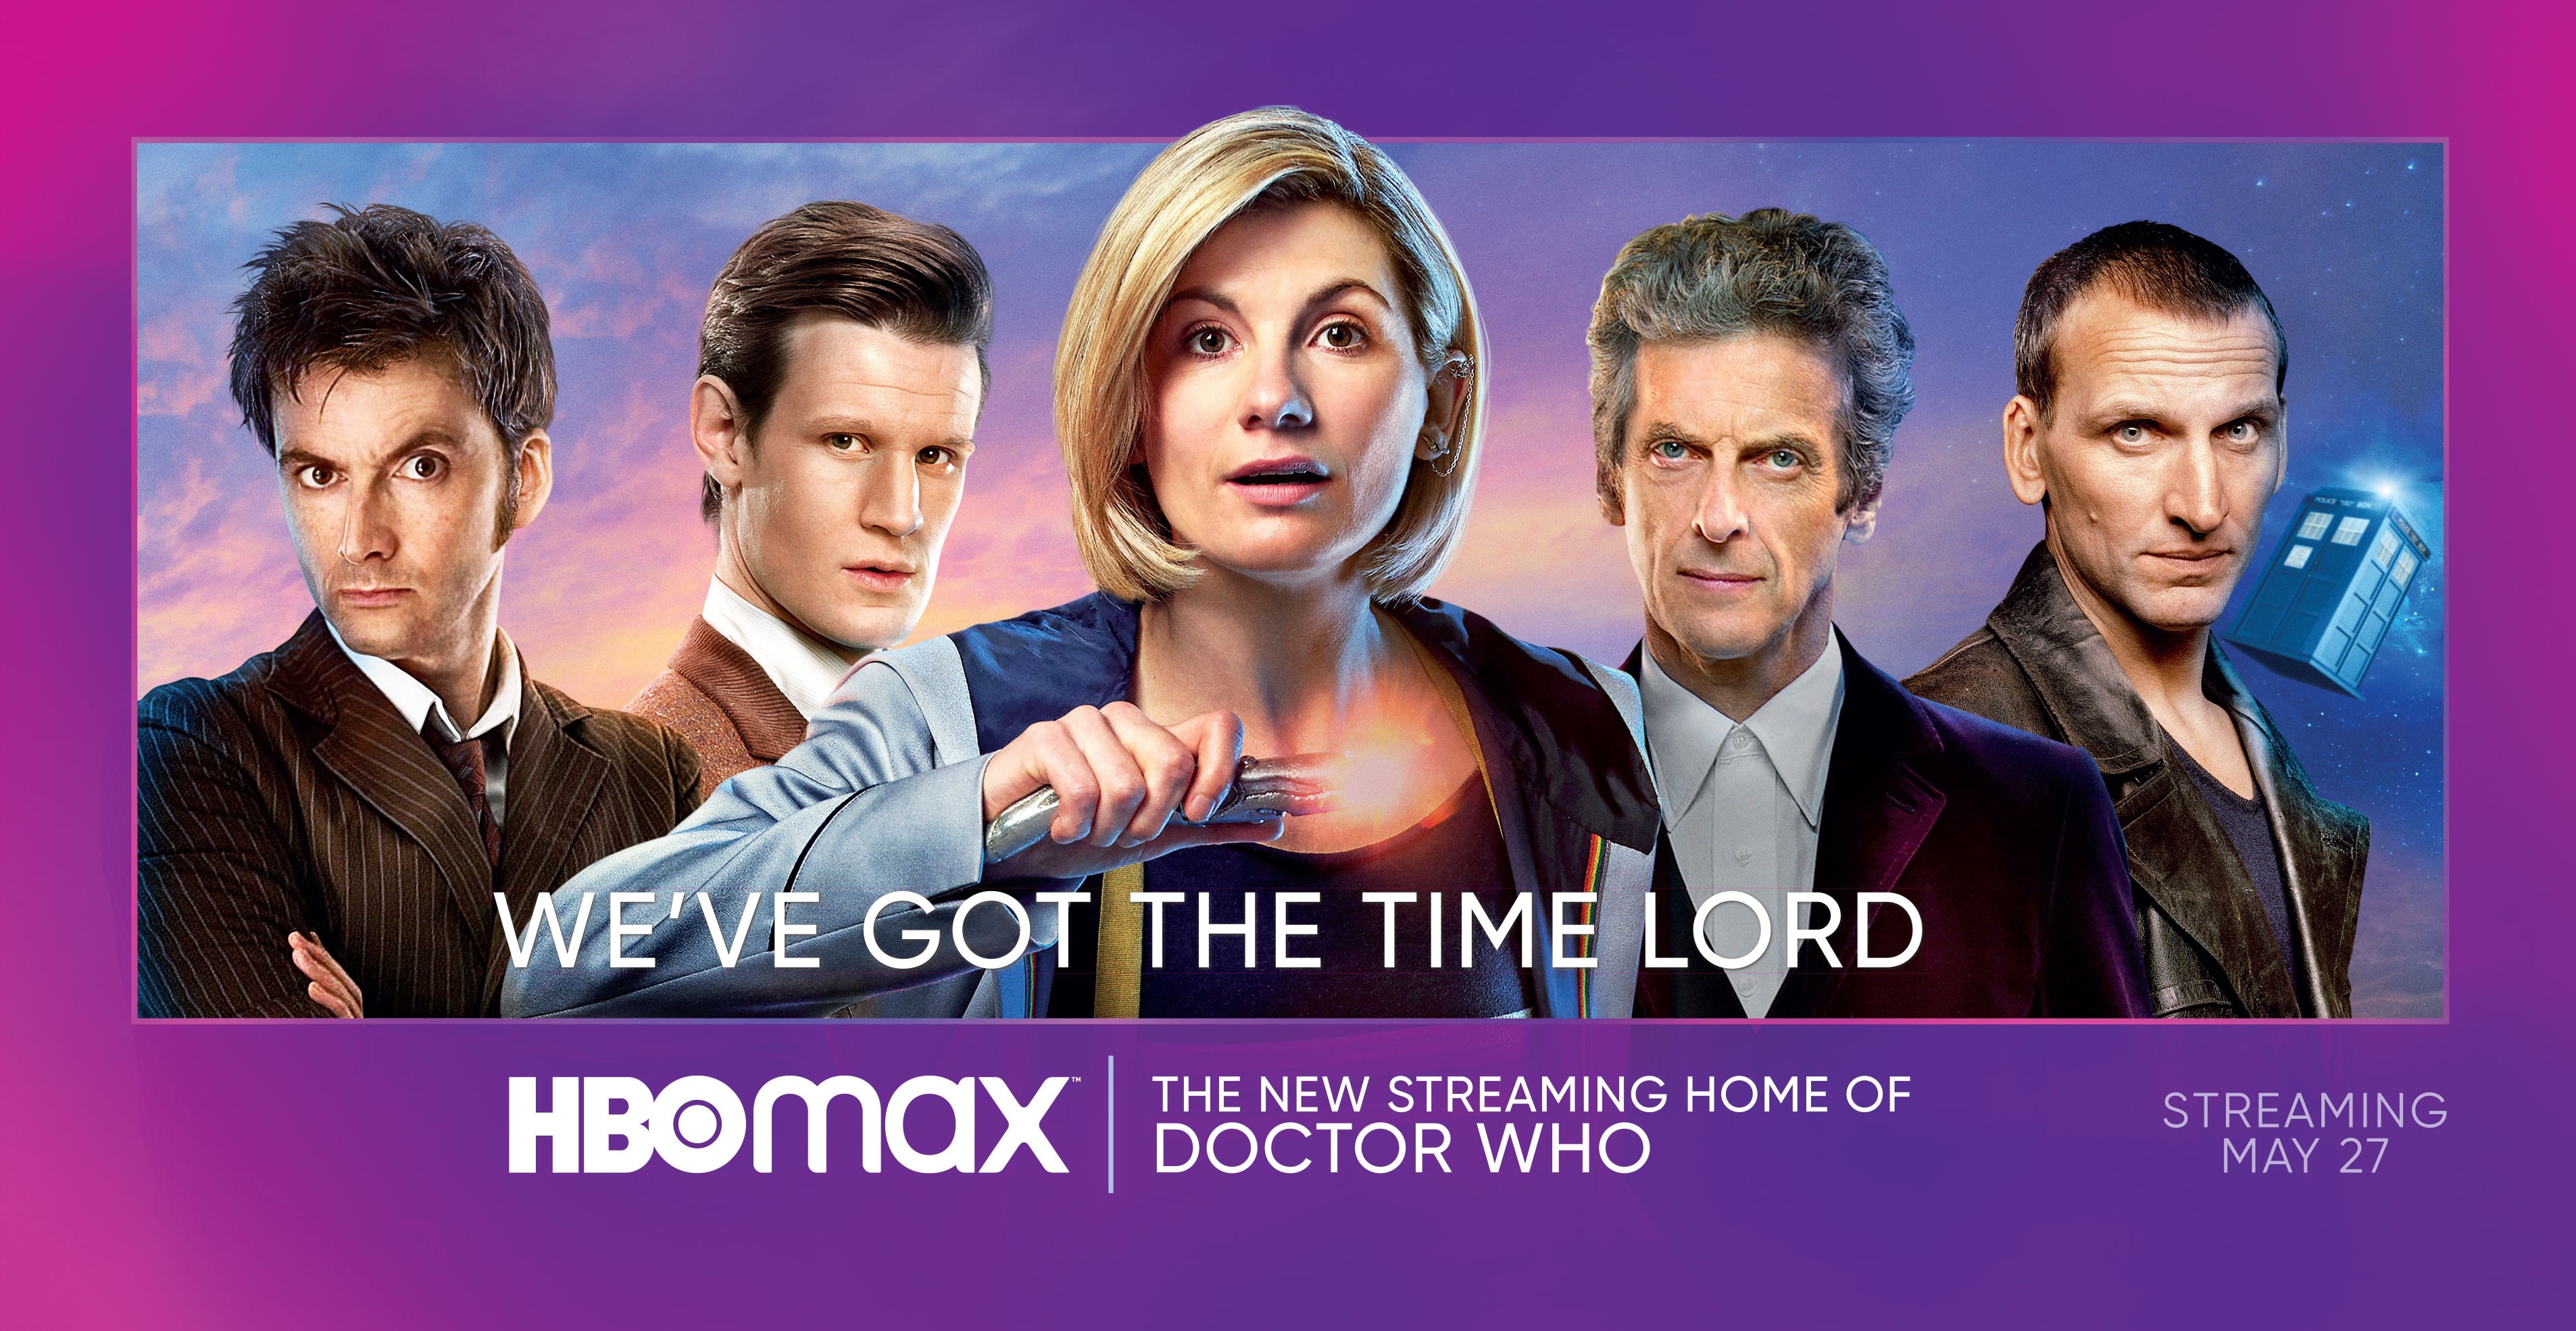 Is Doctor Who on HBO Max?